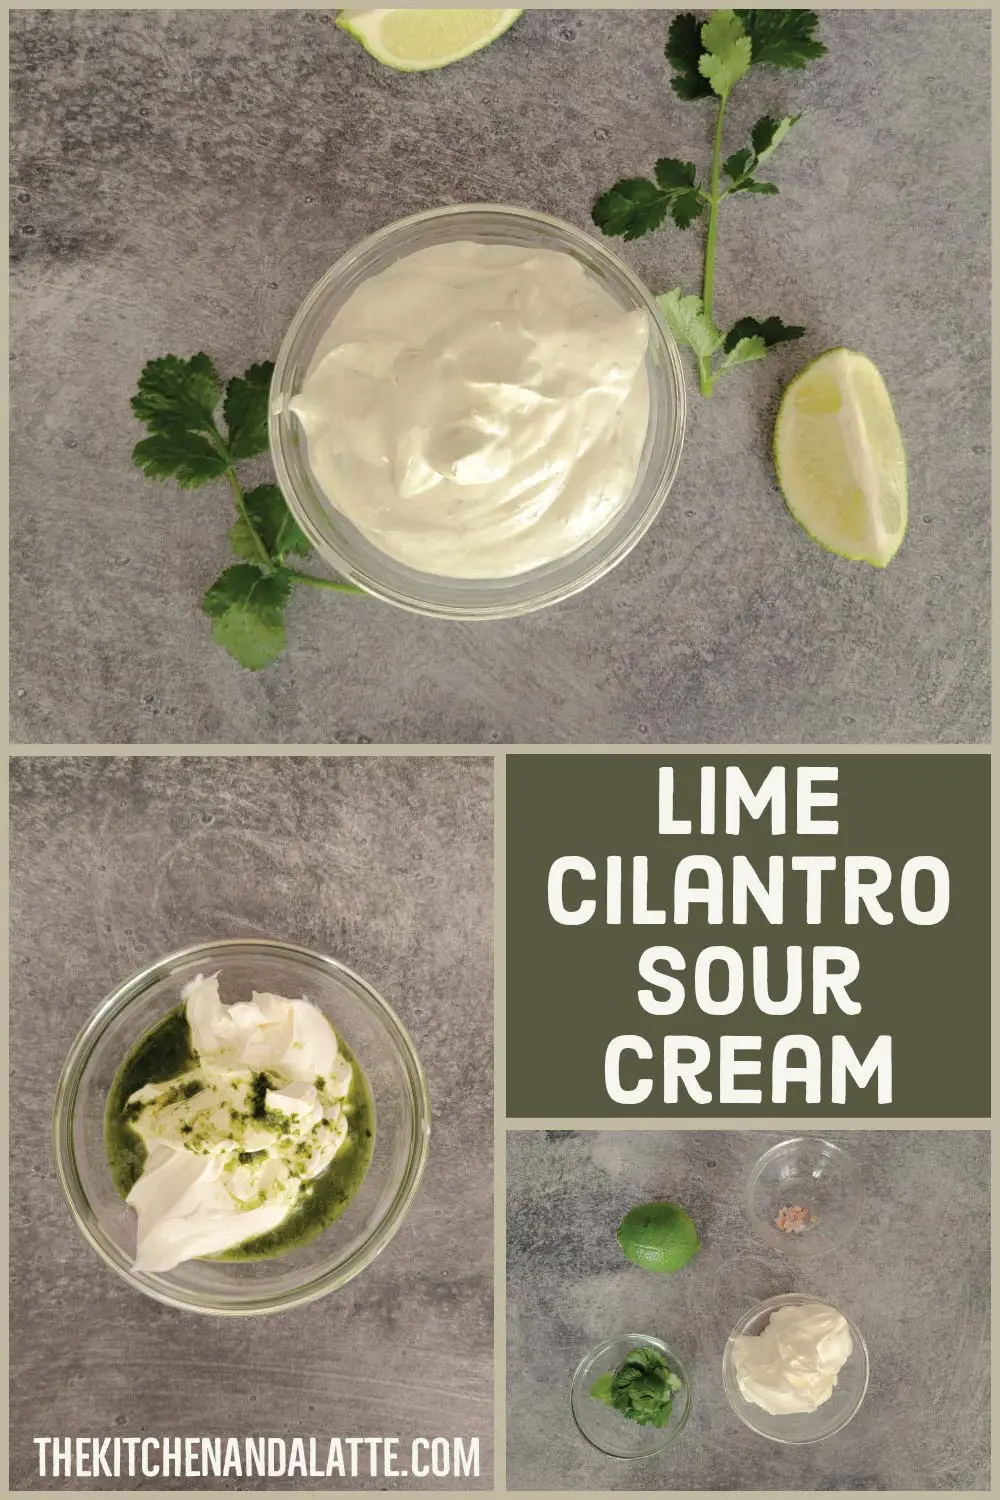 Lime cilantro sour cream Pinterest graphic - ingredients prepped in a prep bowl, sour cream with the lime and cilantro mix over top ready to mix and a bowl with the lime cilantro sour cream mixed ready to serve.